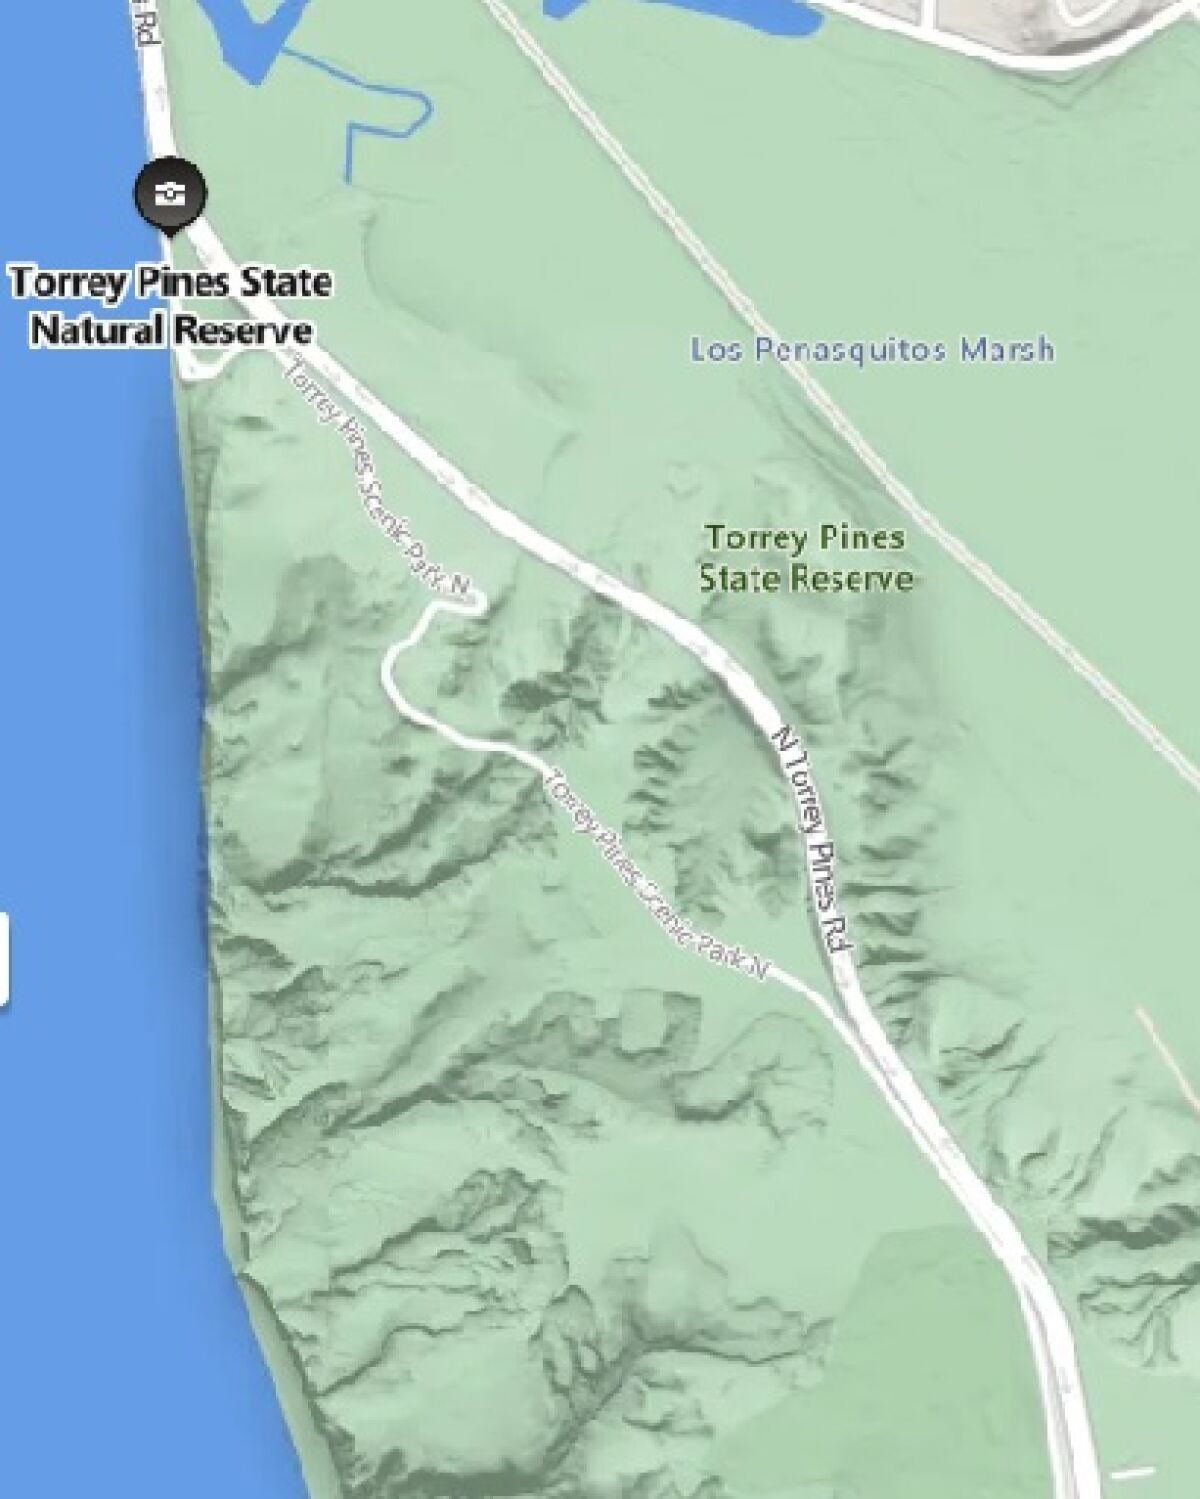 The Torrey Pines State Natural Reserve is one of only two places where the Torrey pine grows in its natural habitat.